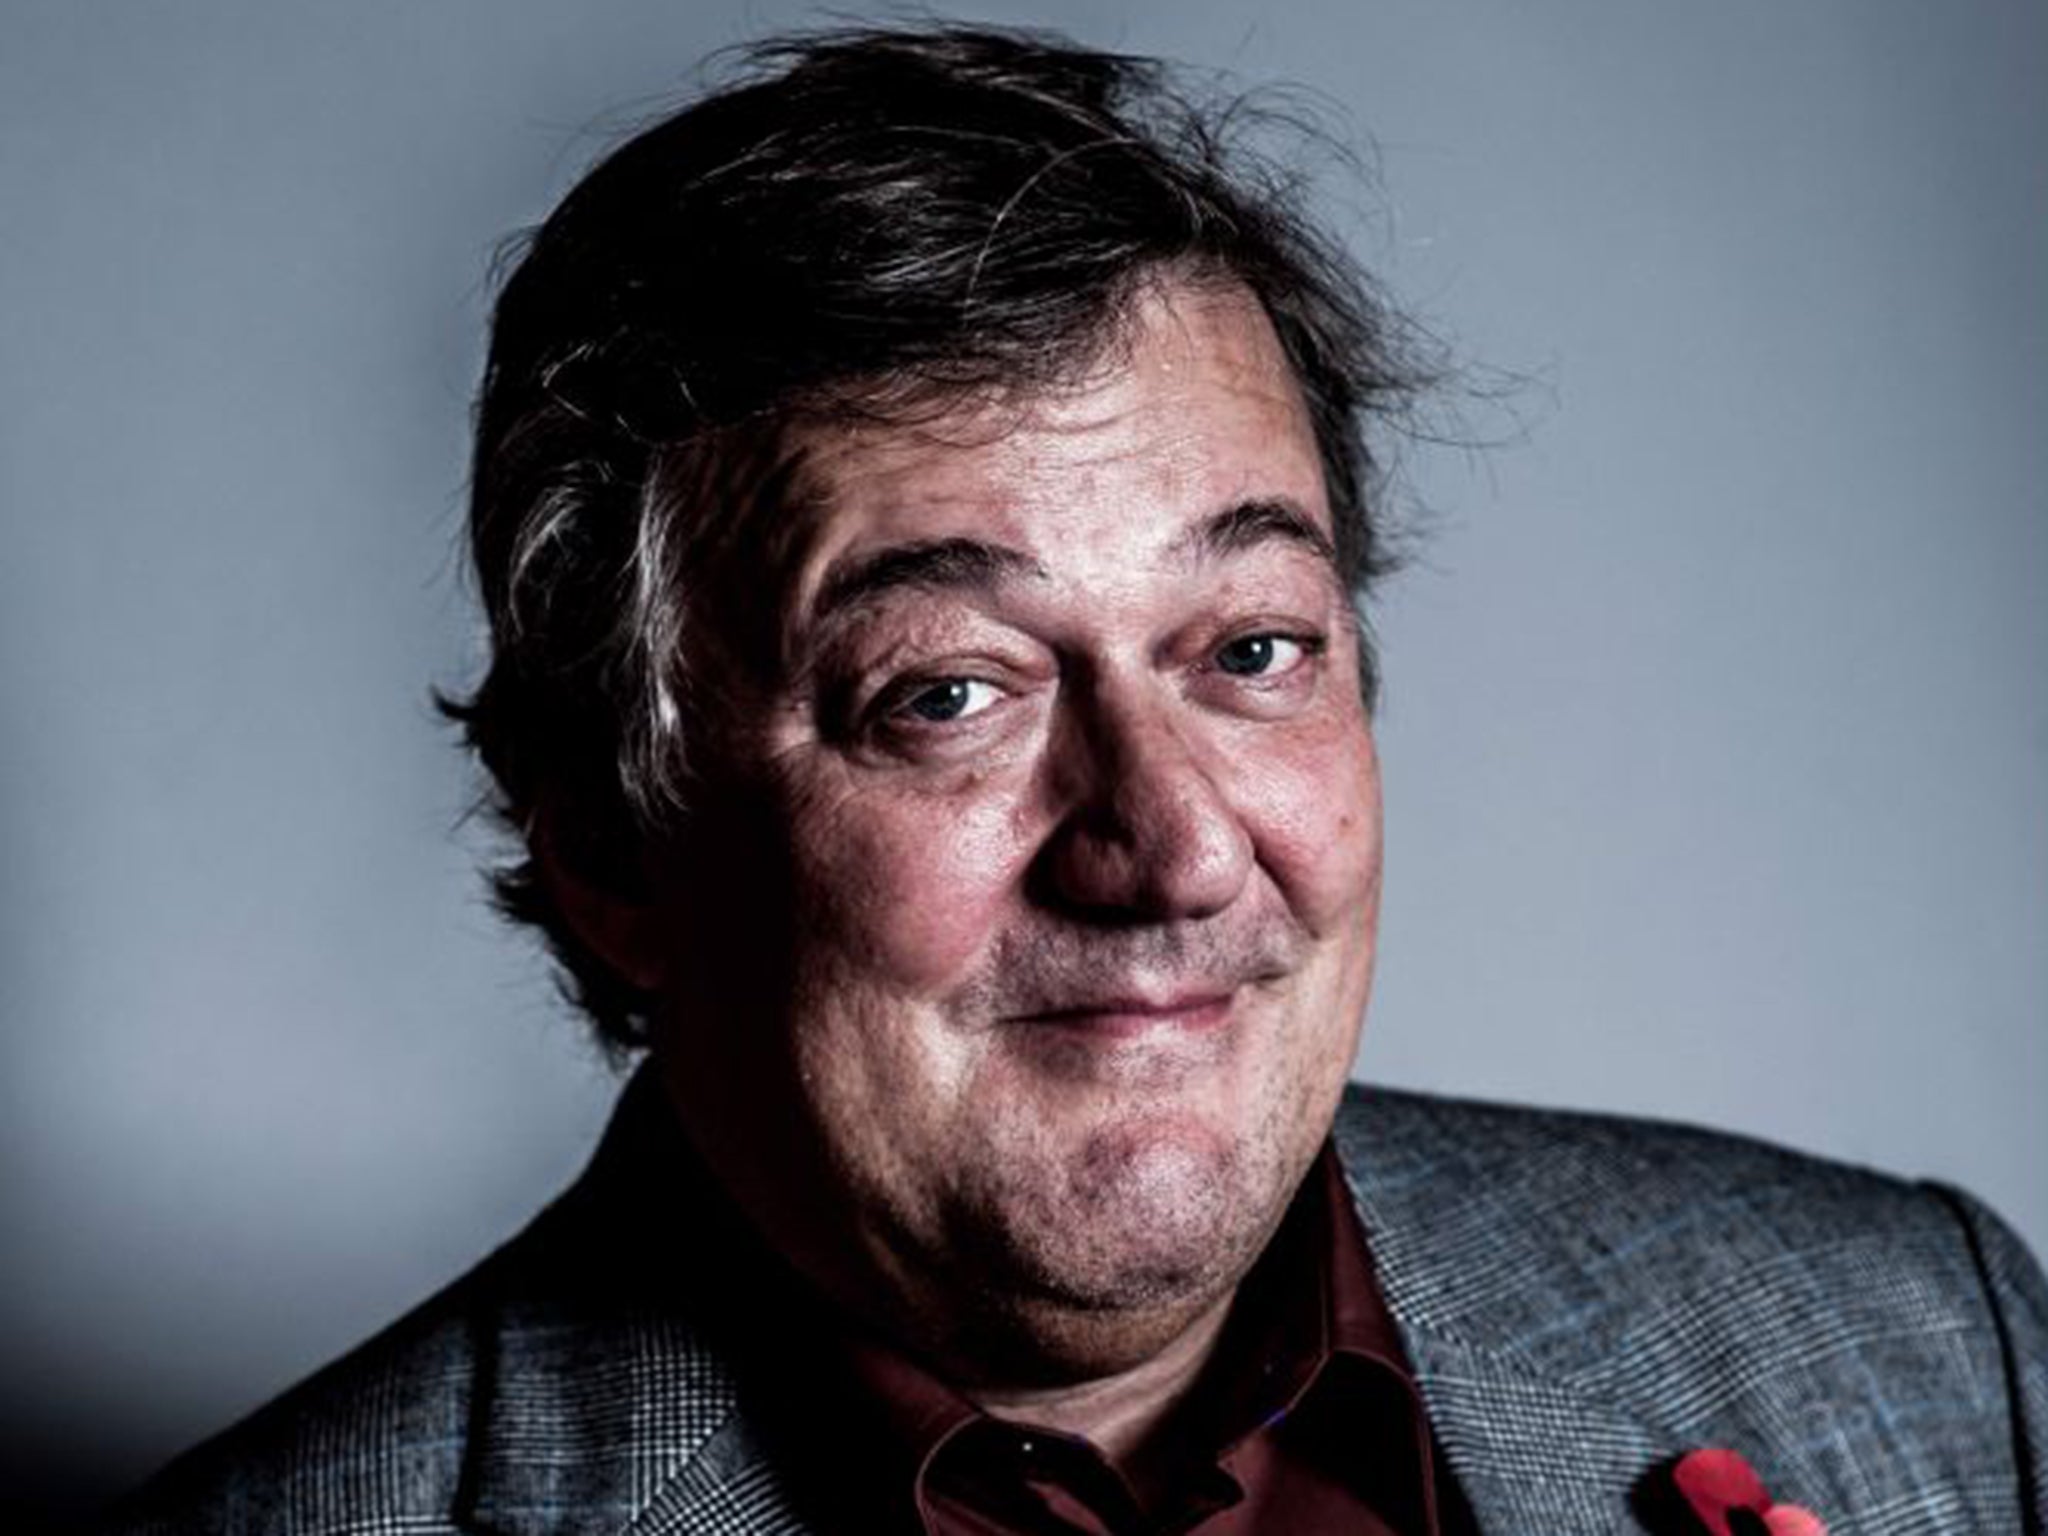 Stephen Fry appears to be culturally ubiquitous